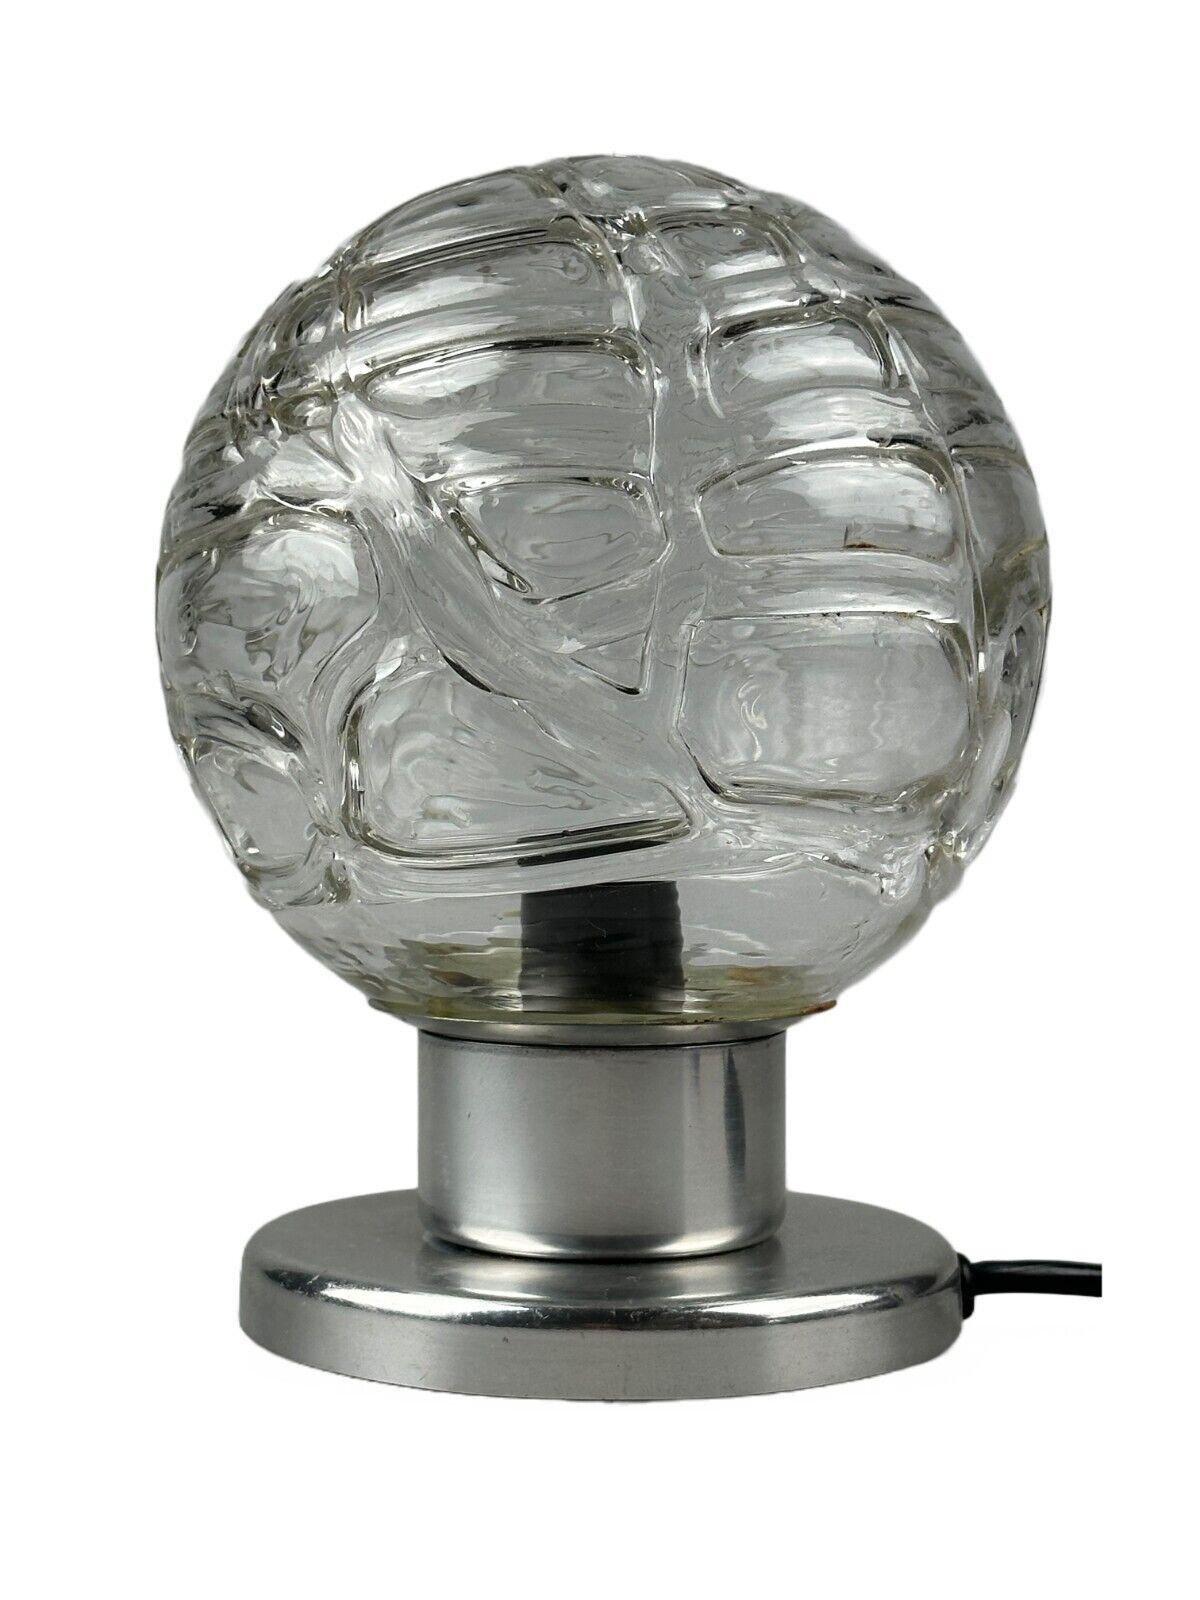 60s 70s table lamp bedside lamp chrome Doria glass space age design

Object: table lamp

Manufacturer: Doria

Condition: good

Age: around 1960-1970

Dimensions:

Diameter = 15cm
Height = 19.5cm

Other notes:

E14 socket

The pictures serve as part